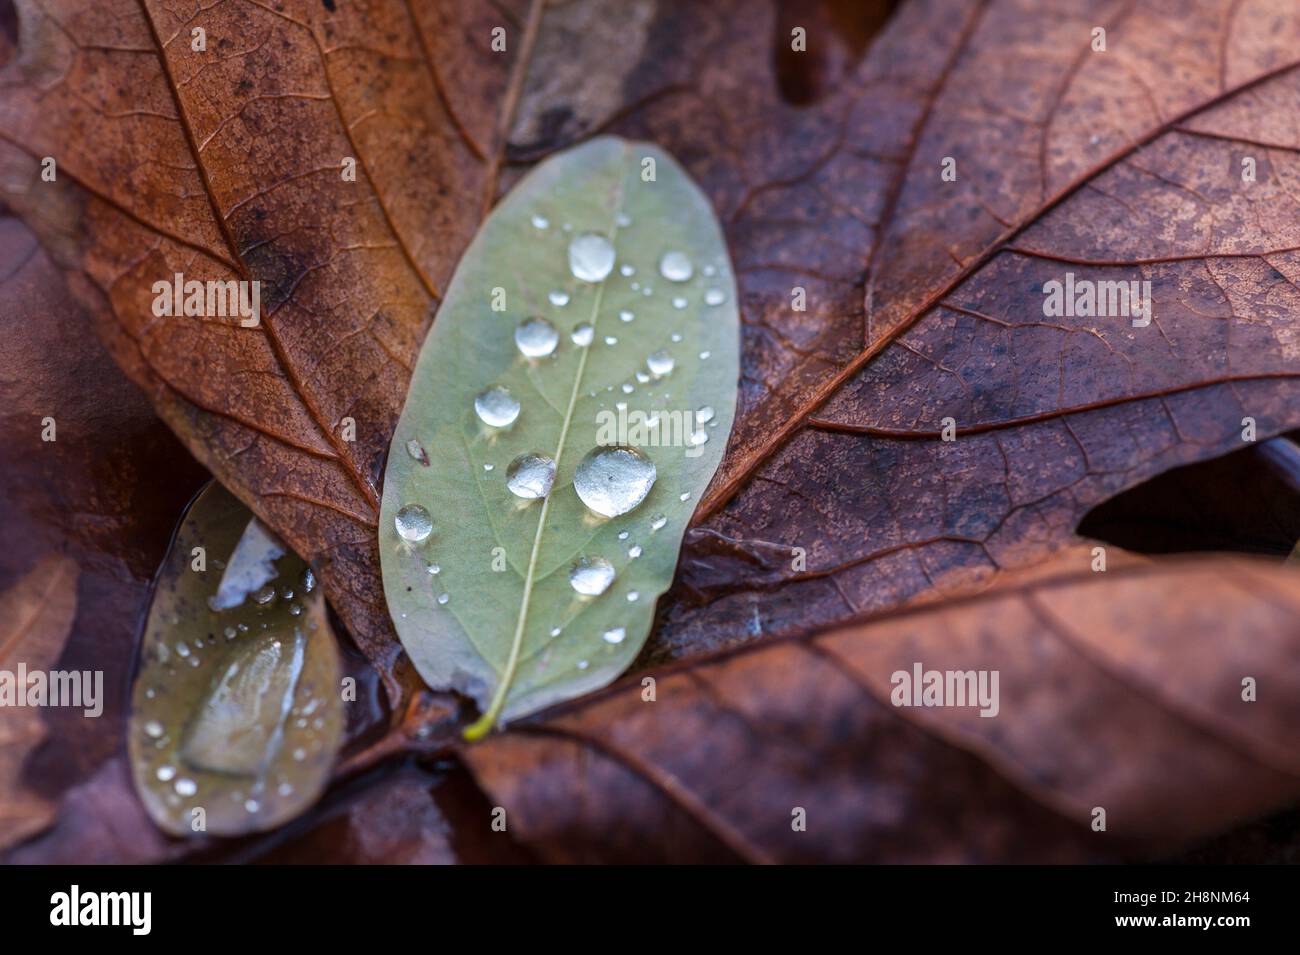 Raindrops on a green leaf Stock Photo